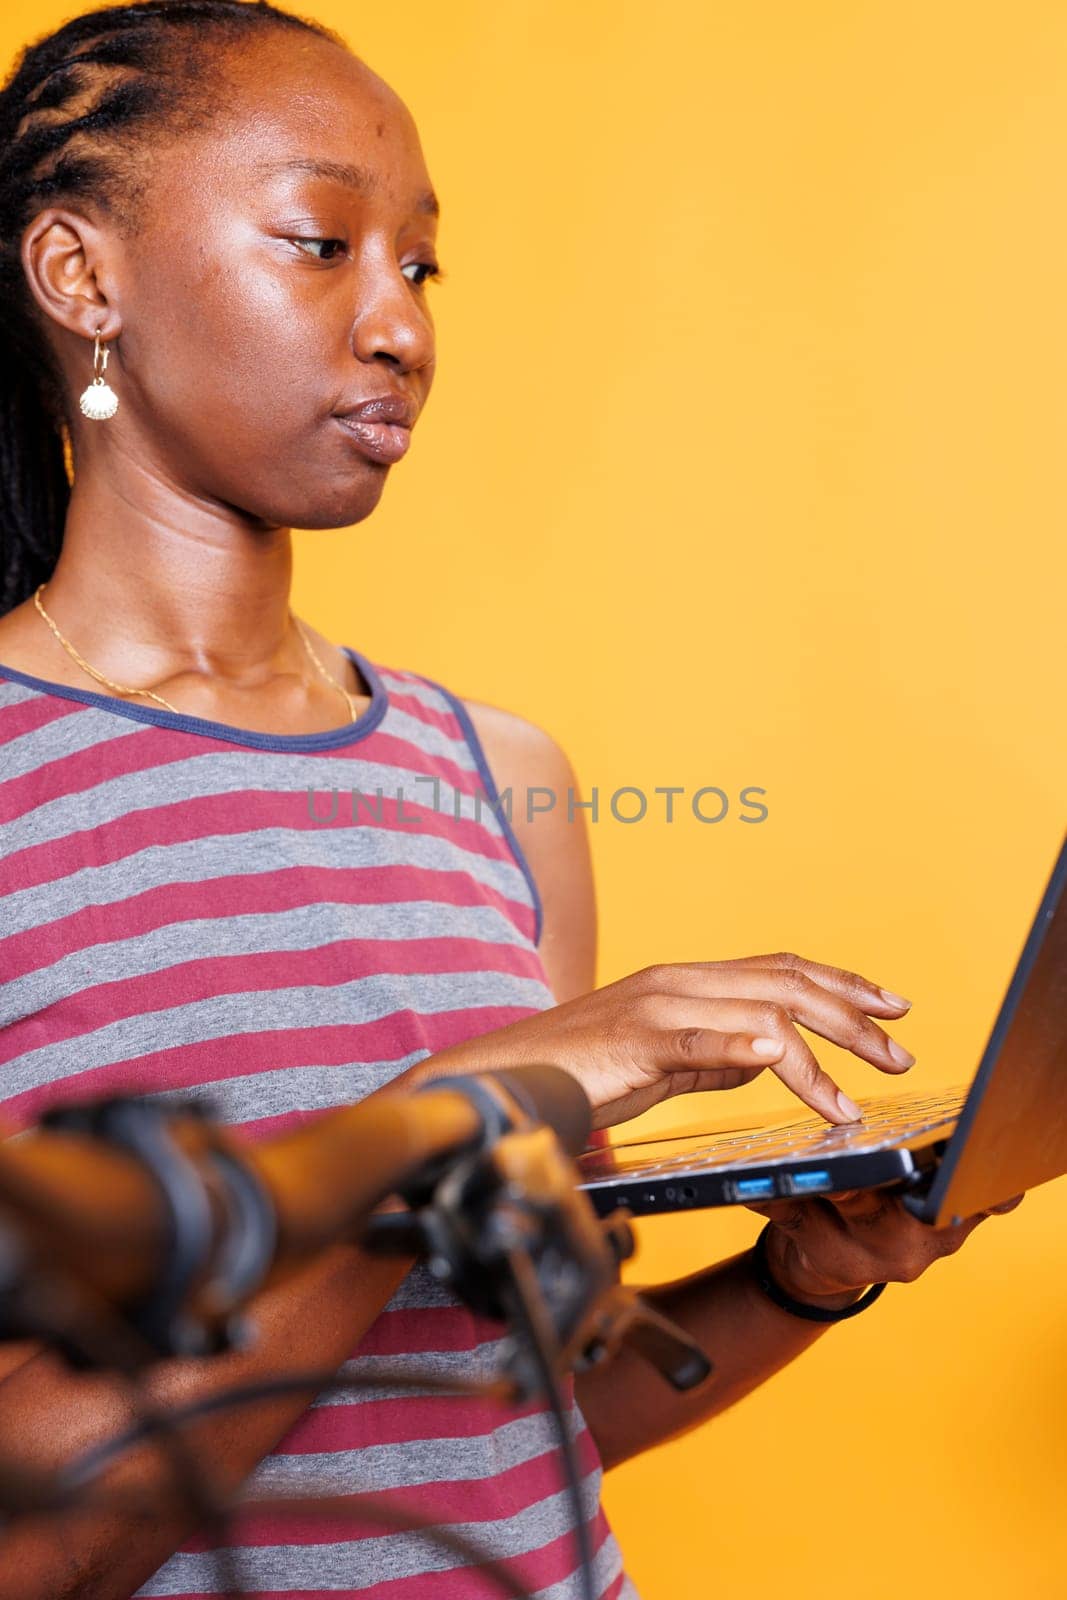 Lady enhances safety of bike with laptop by DCStudio